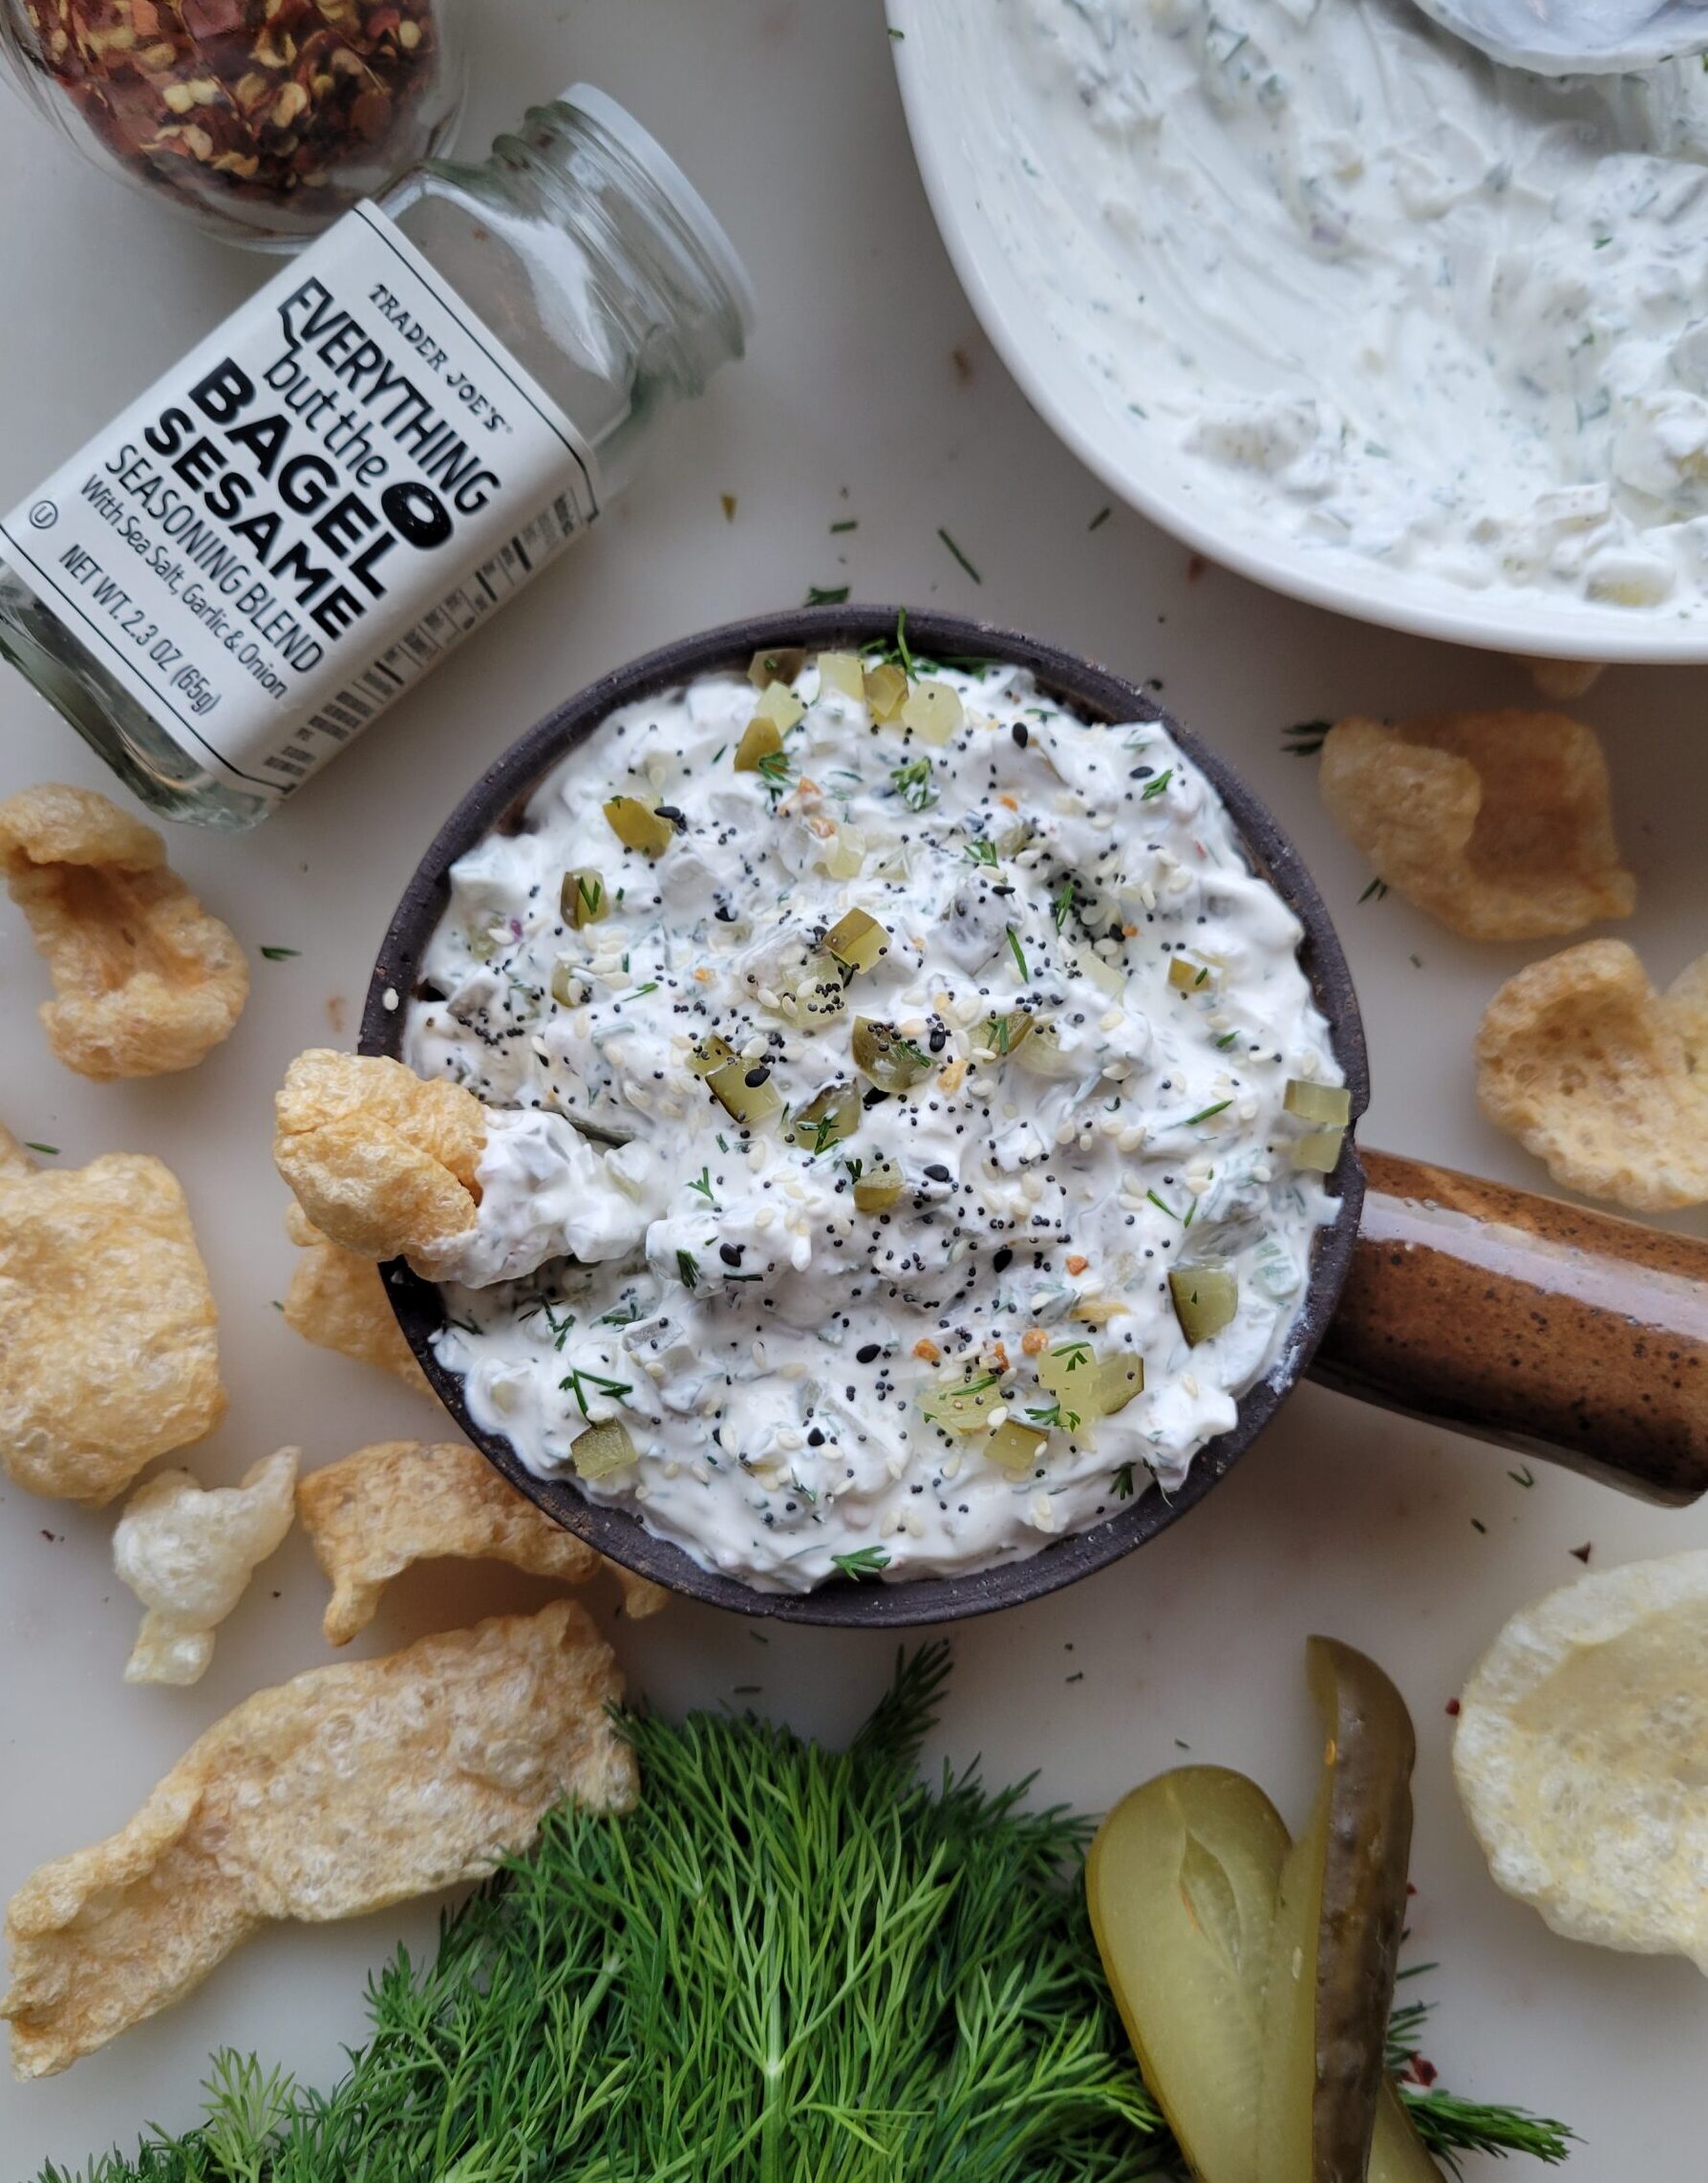 A bowl of Dill Pickle Dip with Jalapeno Pepper in on the counter surrounded by chips and Bagel Sesame Seasoning/